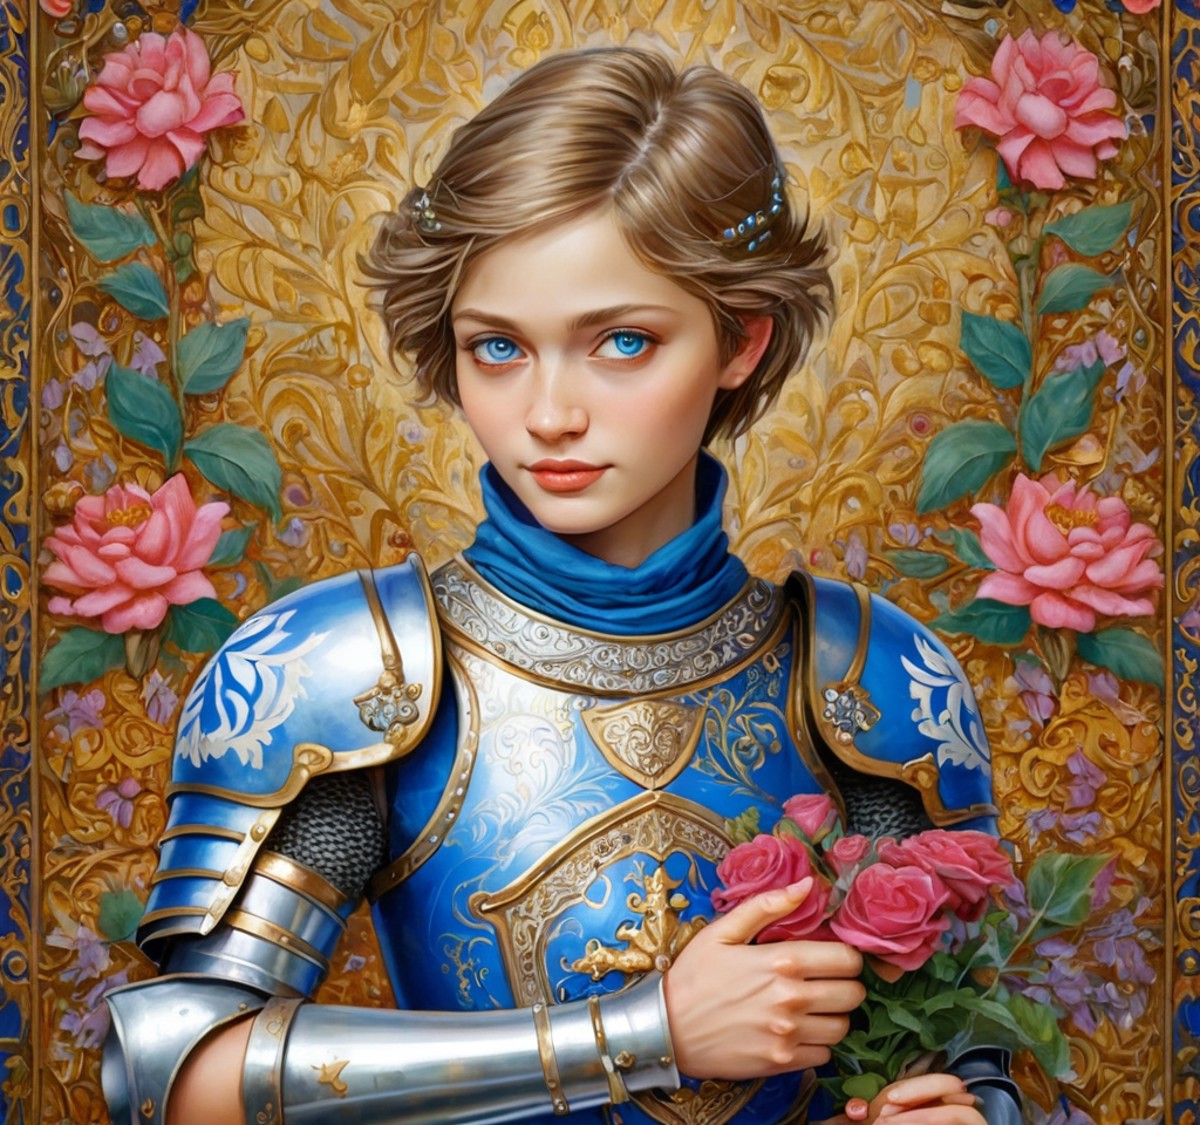 Alisa Selezneva short hair big blue eyes, a woman in knight armor holding her arm with flowers growing our of right pauldron
